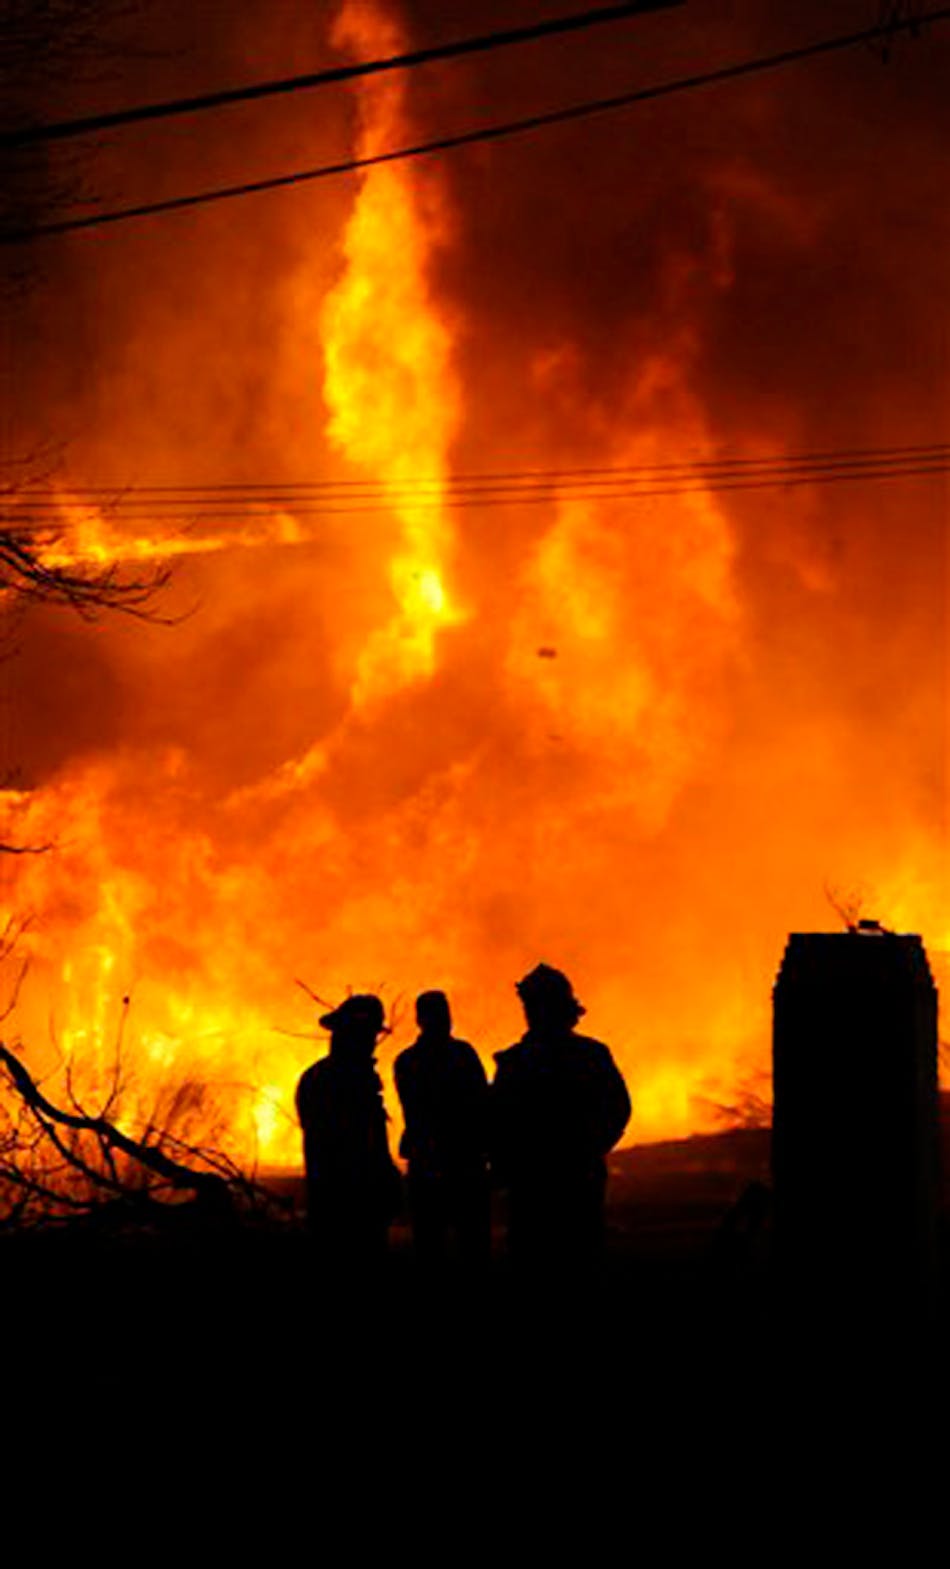 Firefighters monitor a fire at the Whispering Pines Motel in Tasley, Va. on Tuesday, March 12, 2013. Investigators believe the fire to be the work of an arsonist in Accomack County who has set more that 65 fires since November. This motel is the largest fire set so far. Parts of the motel date to the 1930s. A $25,000 reward is being offered for information leading to an arrest and conviction.